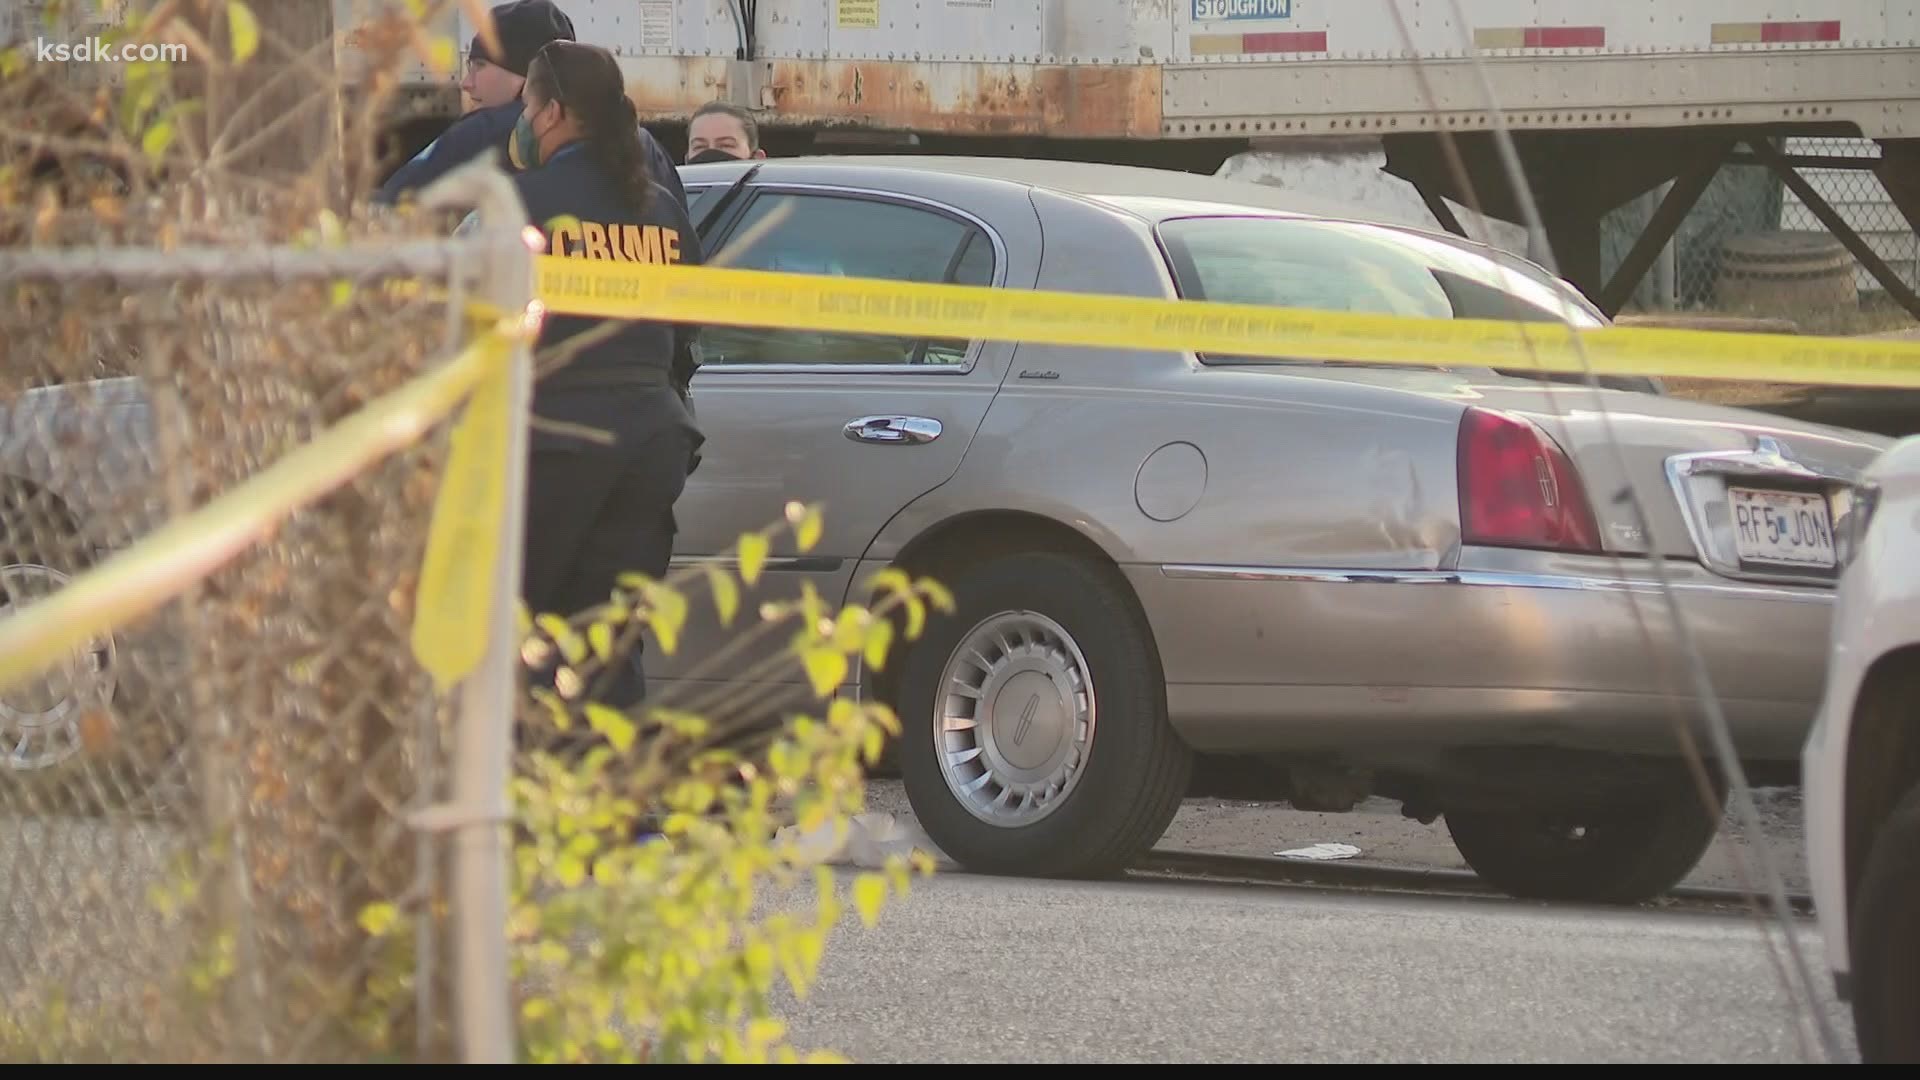 The teen was shot in the area of Wilson and Clifton Avenue Thursday afternoon